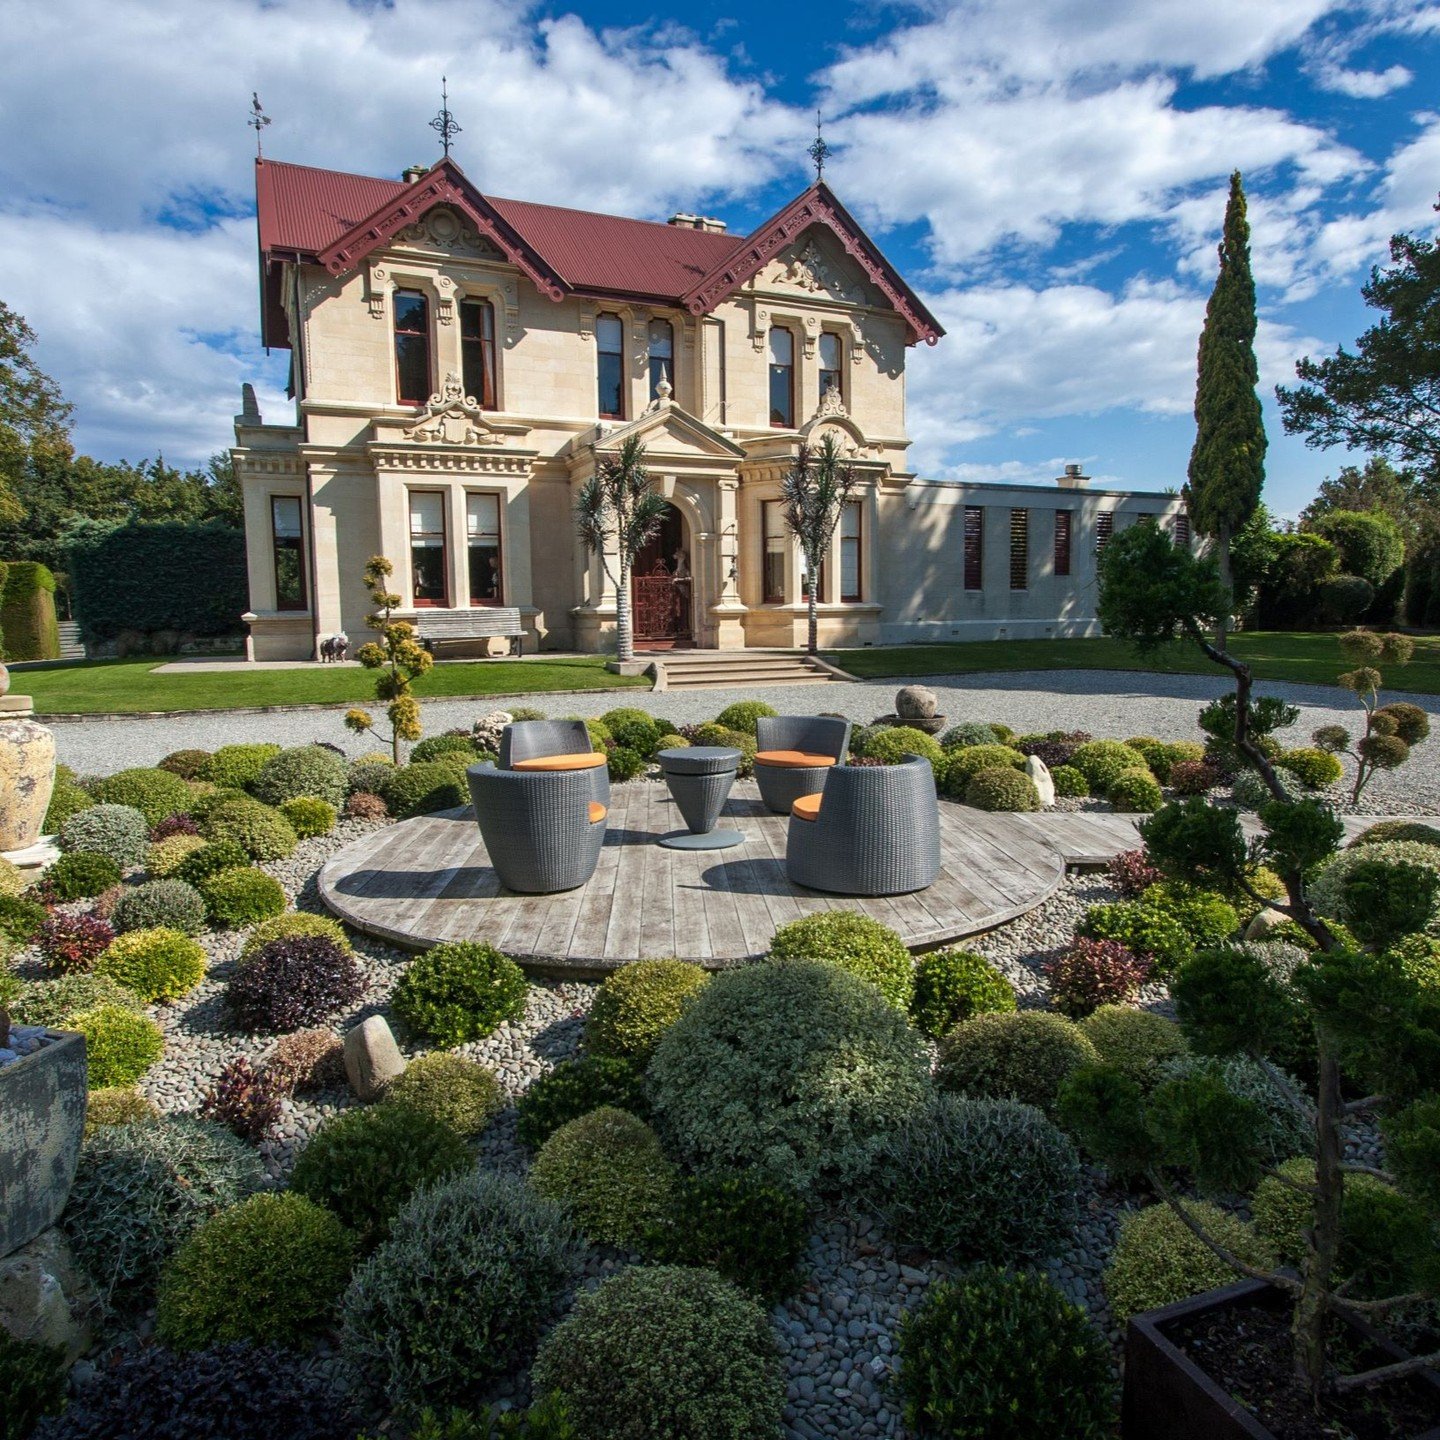 Beautiful Brookfield Park Gardens in Oamaru... ⭐⭐⭐⭐⭐
#opengarden 
JJ took over the property in 2003. Then in a ruinous state, it has been a restorative challenge. Bordered by magnificent hedges, the majority of Brookfield&rsquo;s gardens are containe